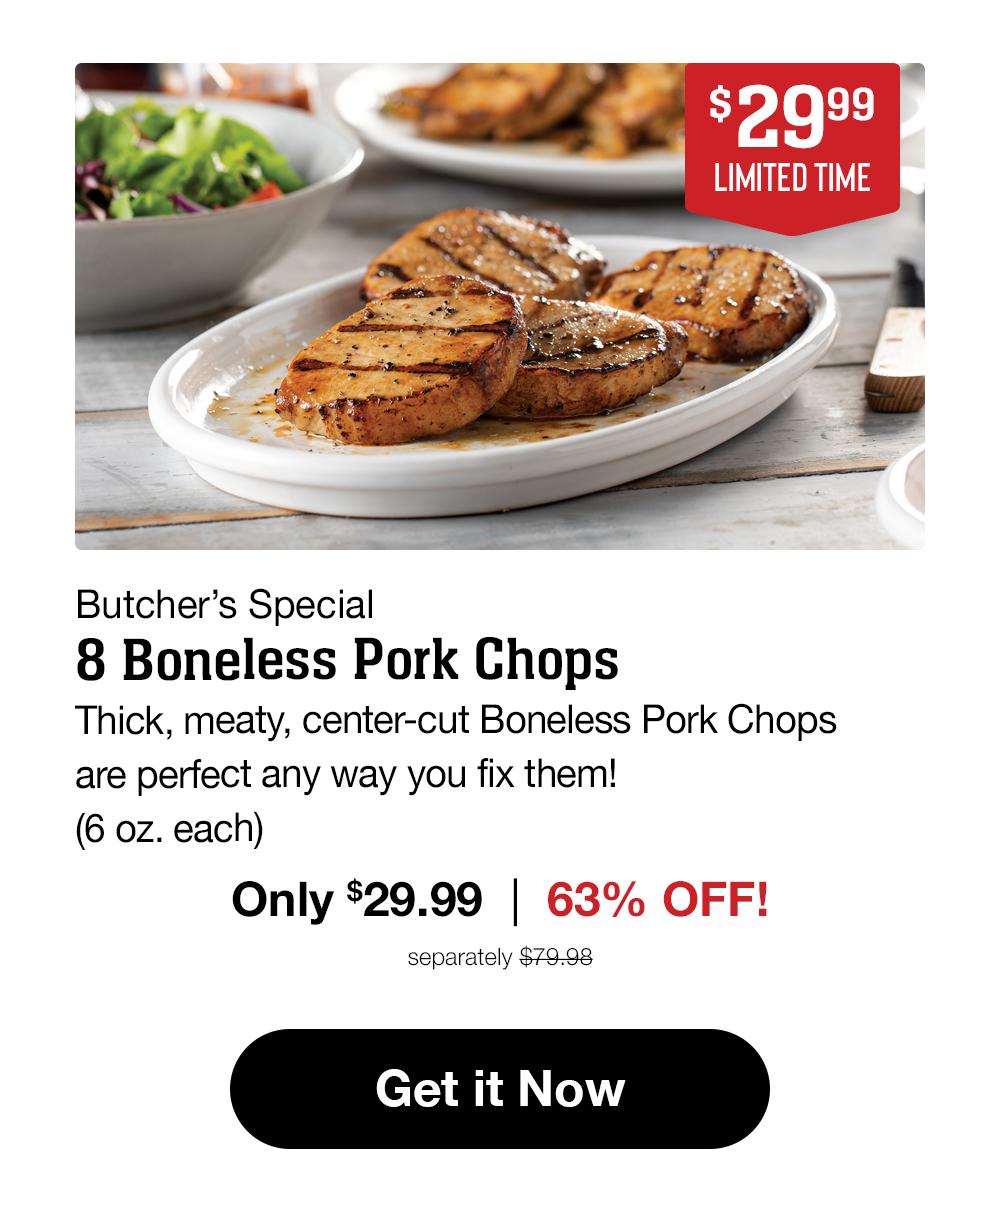 $29.99 LIMITED TIME Butcher's Special 8 Boneless Pork Chops Thick, meaty, center-cut Boneless Pork Chops are perfect any way you fix them! (6 oz. each) Only $29.99 | 63% OFF! separately $79.98 Get it Now